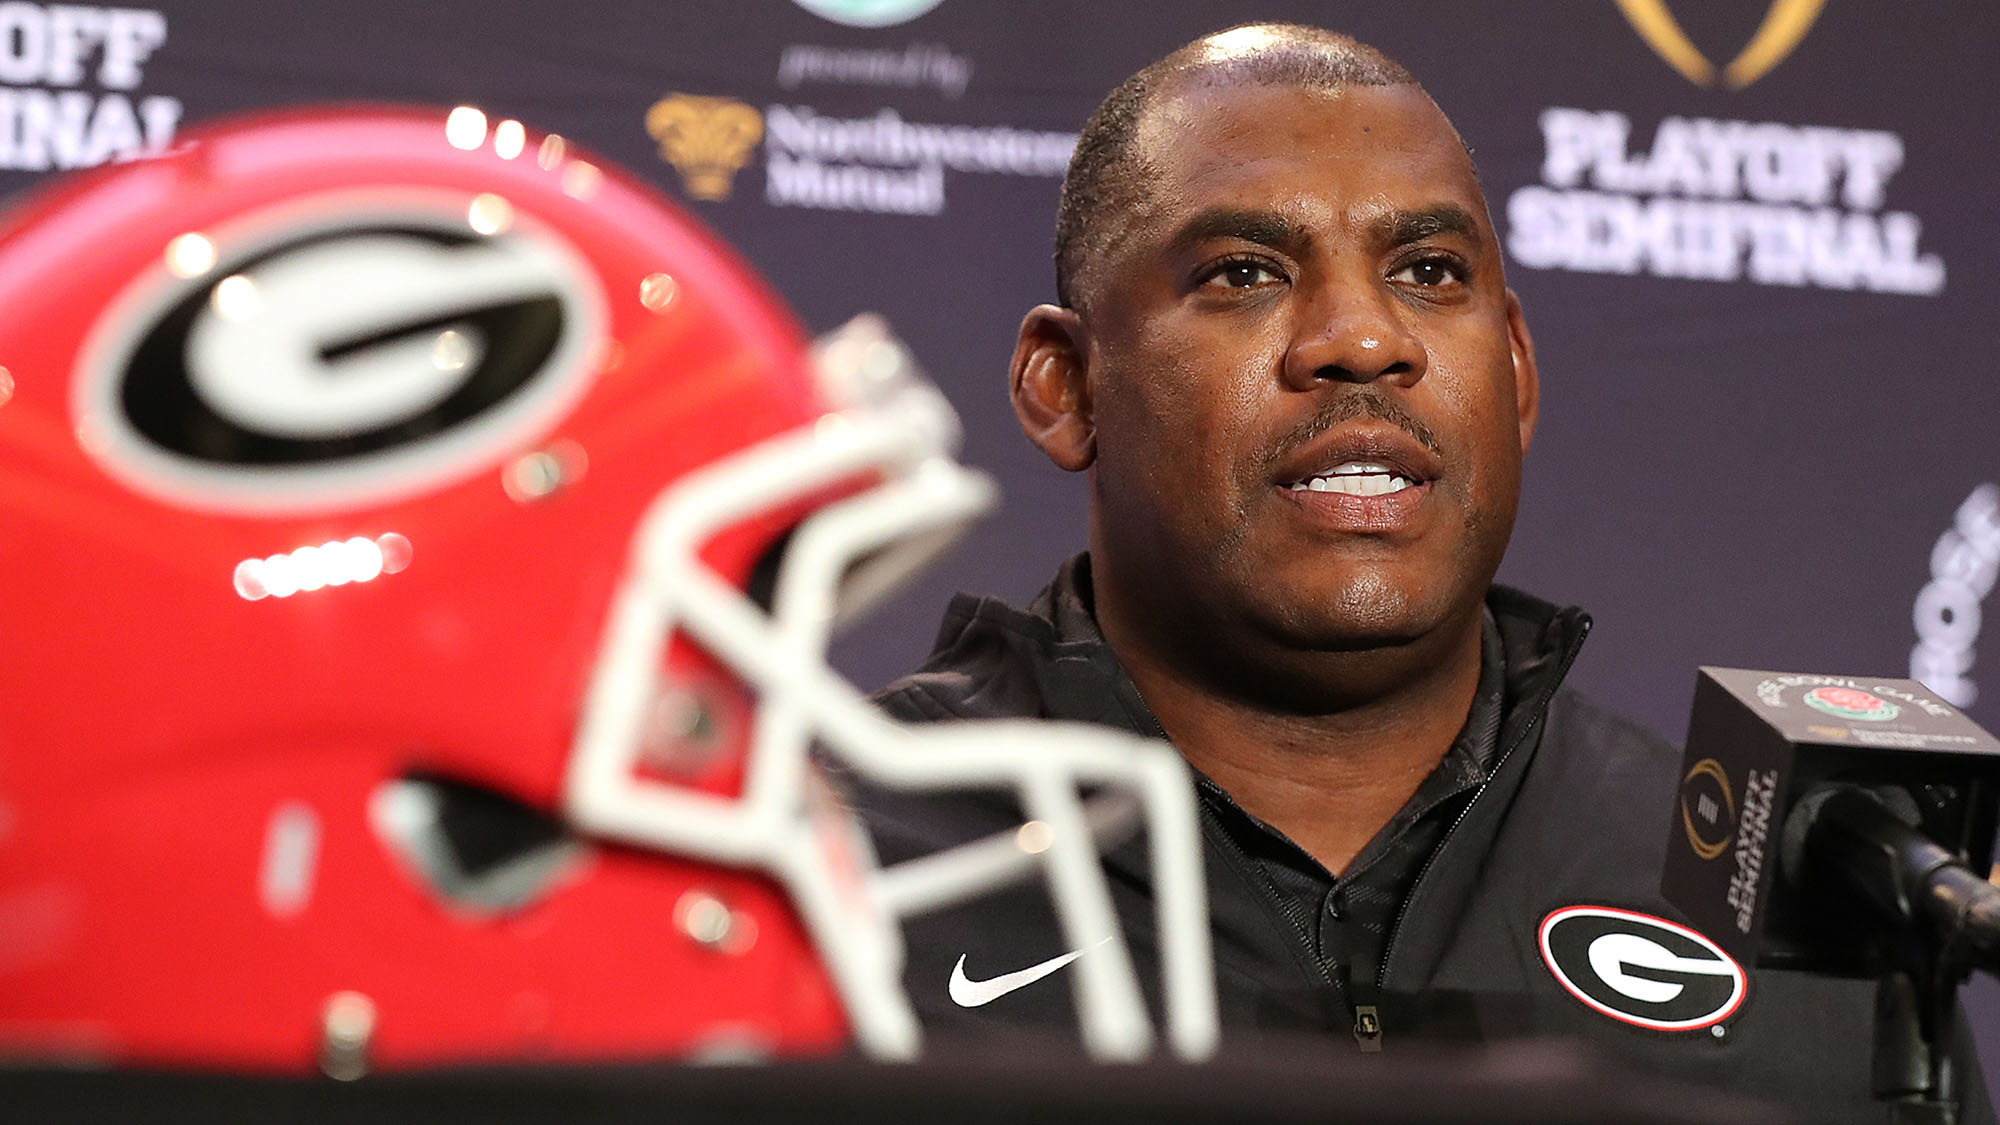 Reports: UGA assistant Tucker to become new head coach at Colorado